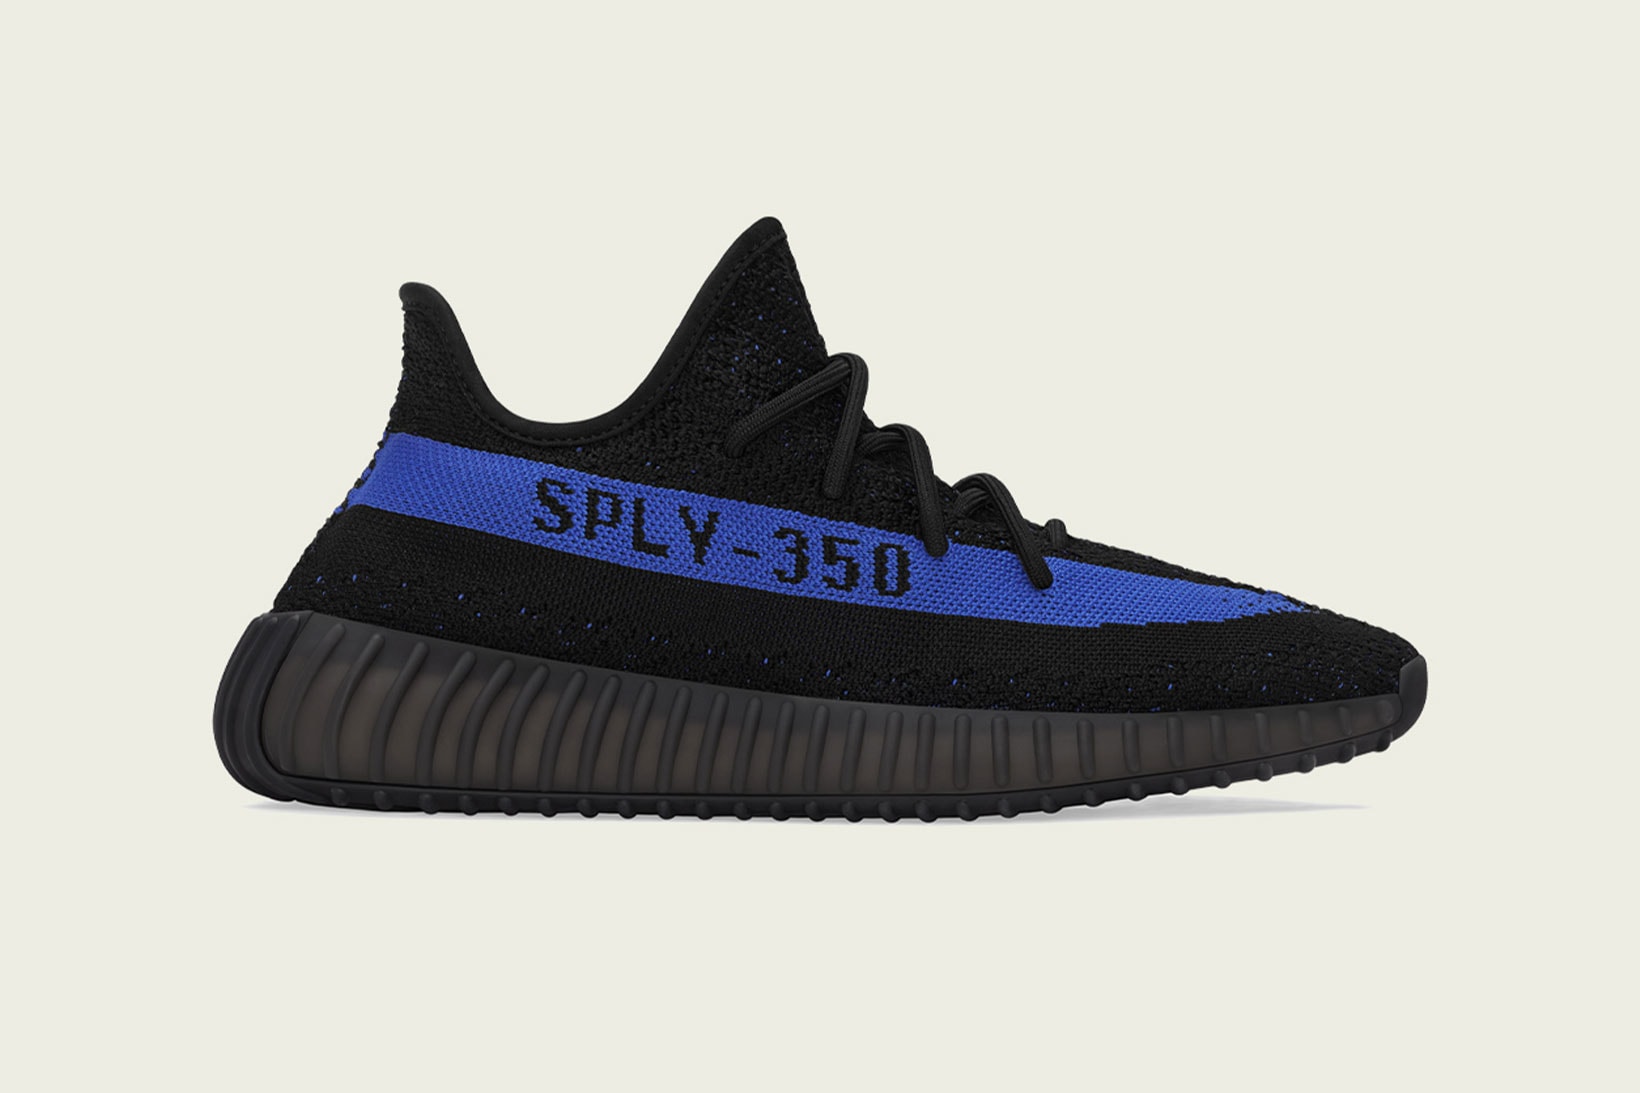 Kanye West adidas YEEZY BOOST 350 V2 Dazzling Blue Side View